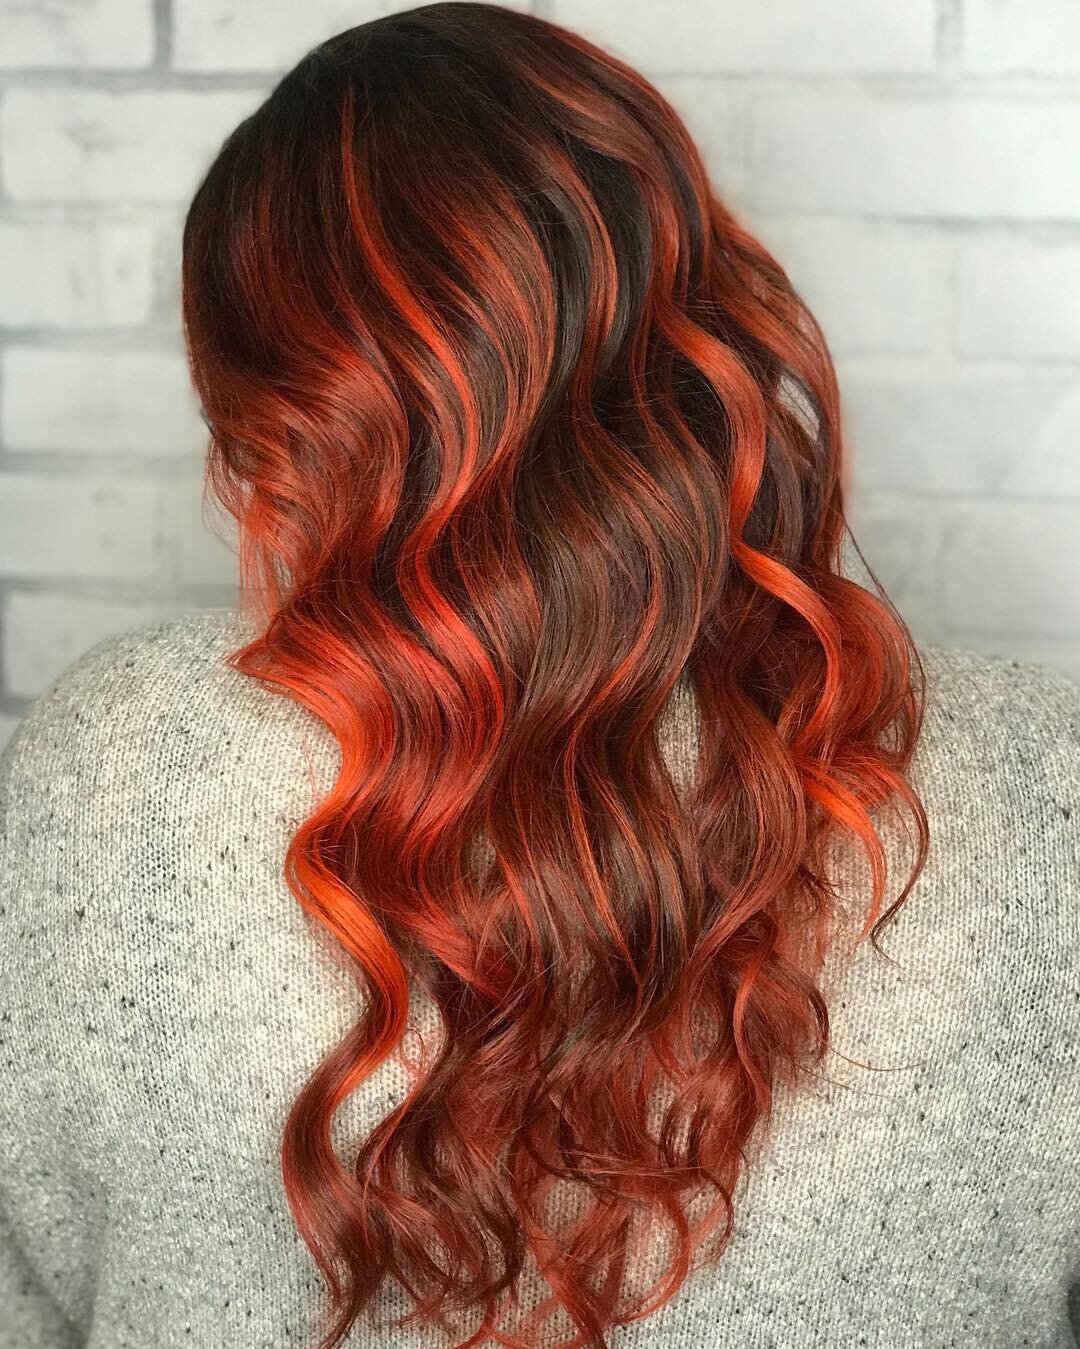 In love with these falls tones 🍁🍂🥀